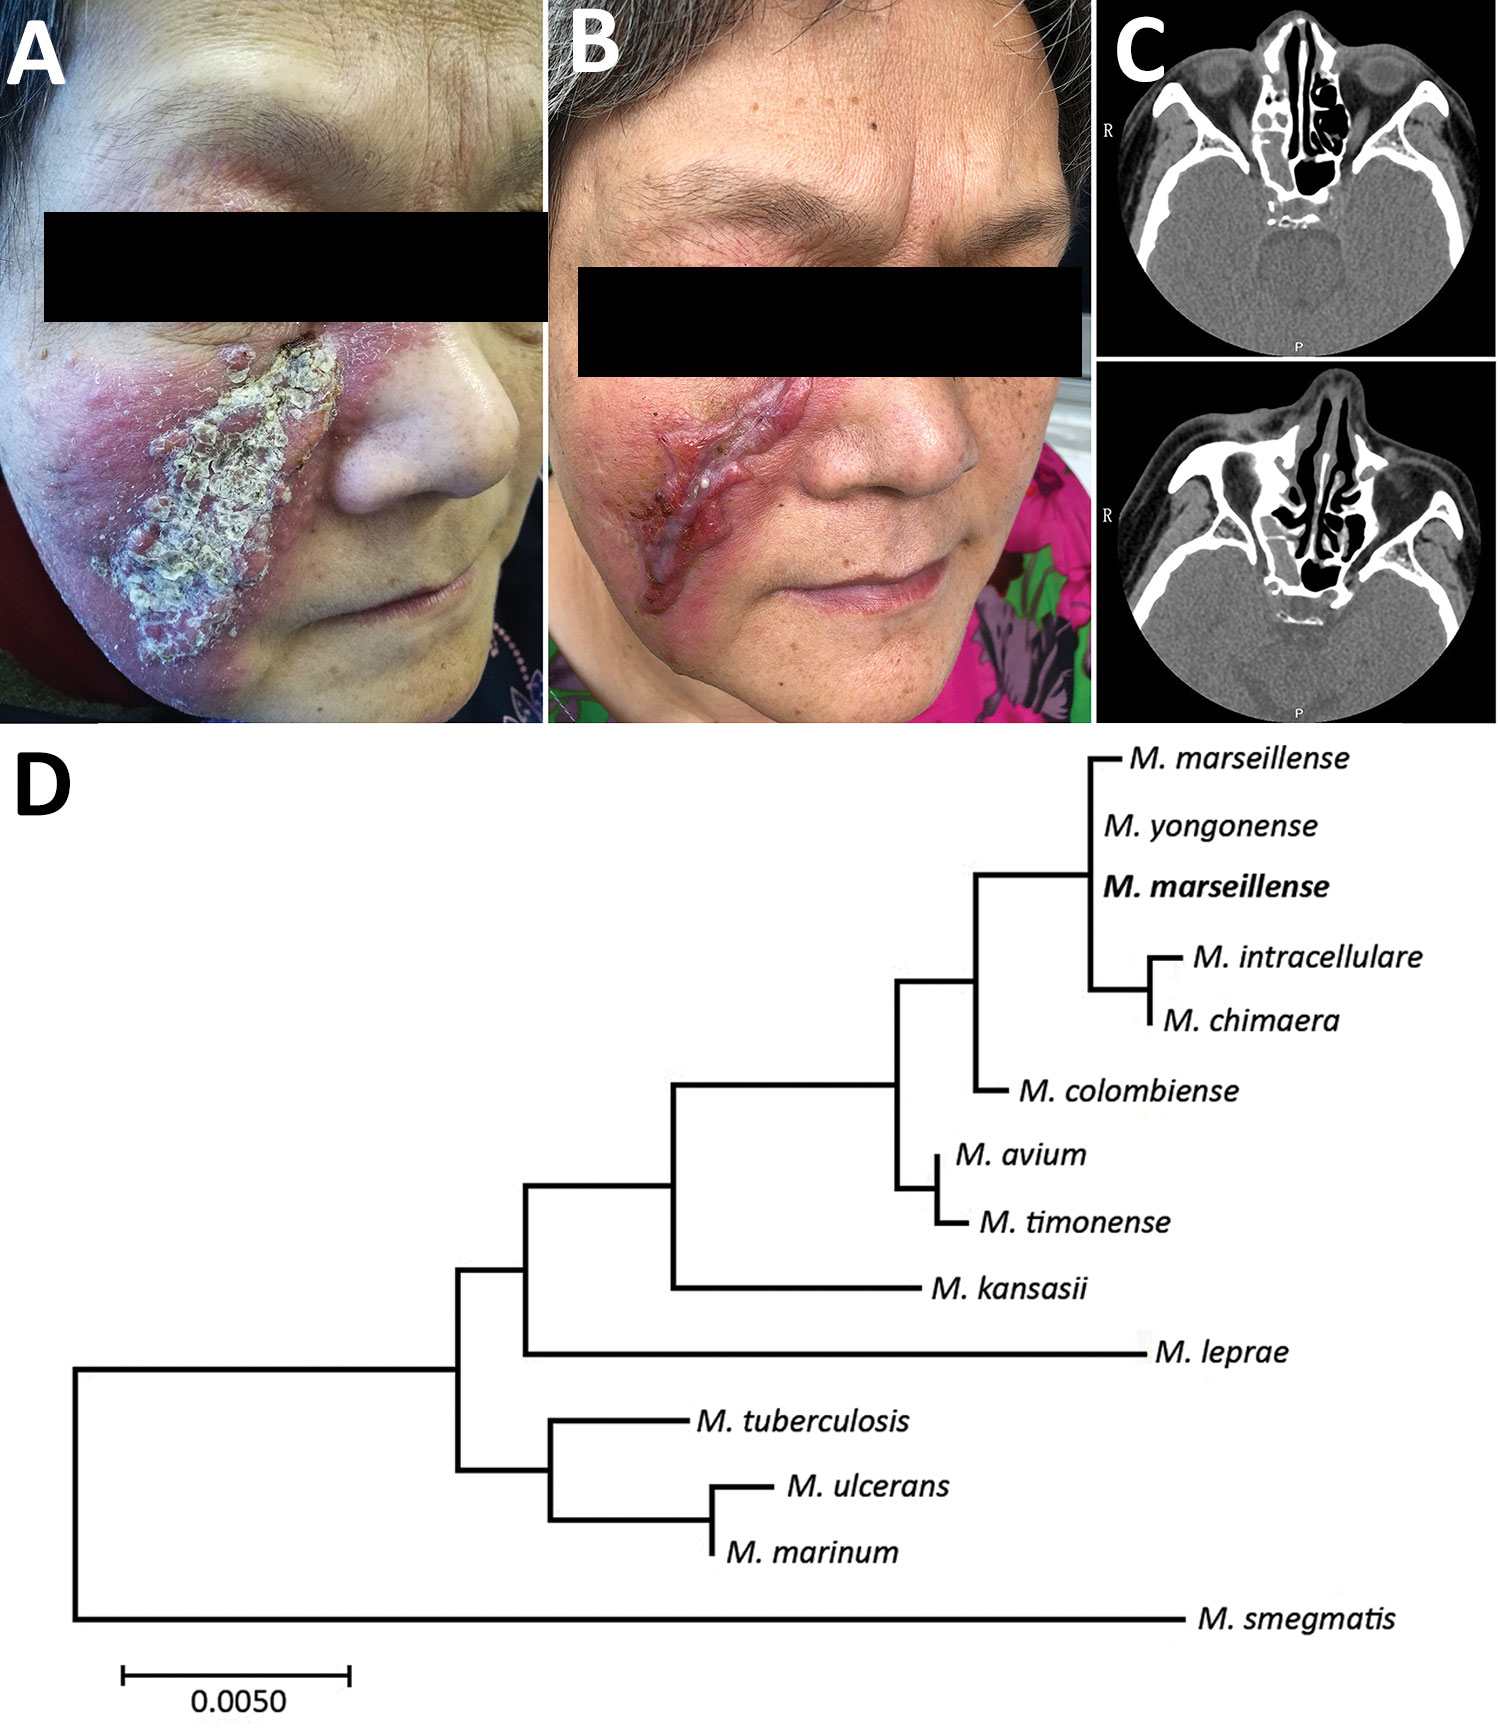 Skin lesions and computer tomography scans of woman with Mycobacterium marseillense skin infection, China, 2018, and genomic analysis of isolate. A, B) Facial skin lesion of woman with M. marseillense infection before and after treatment. Infiltrated erythematous plaque with yellowish scales and crusts (A) resolved to a scar after clearance of infection (B). C) Computed tomography imaging before treatment (top) shows heterogeneous hypersignal in right ethmoid sinus and after treatment (bottom) s